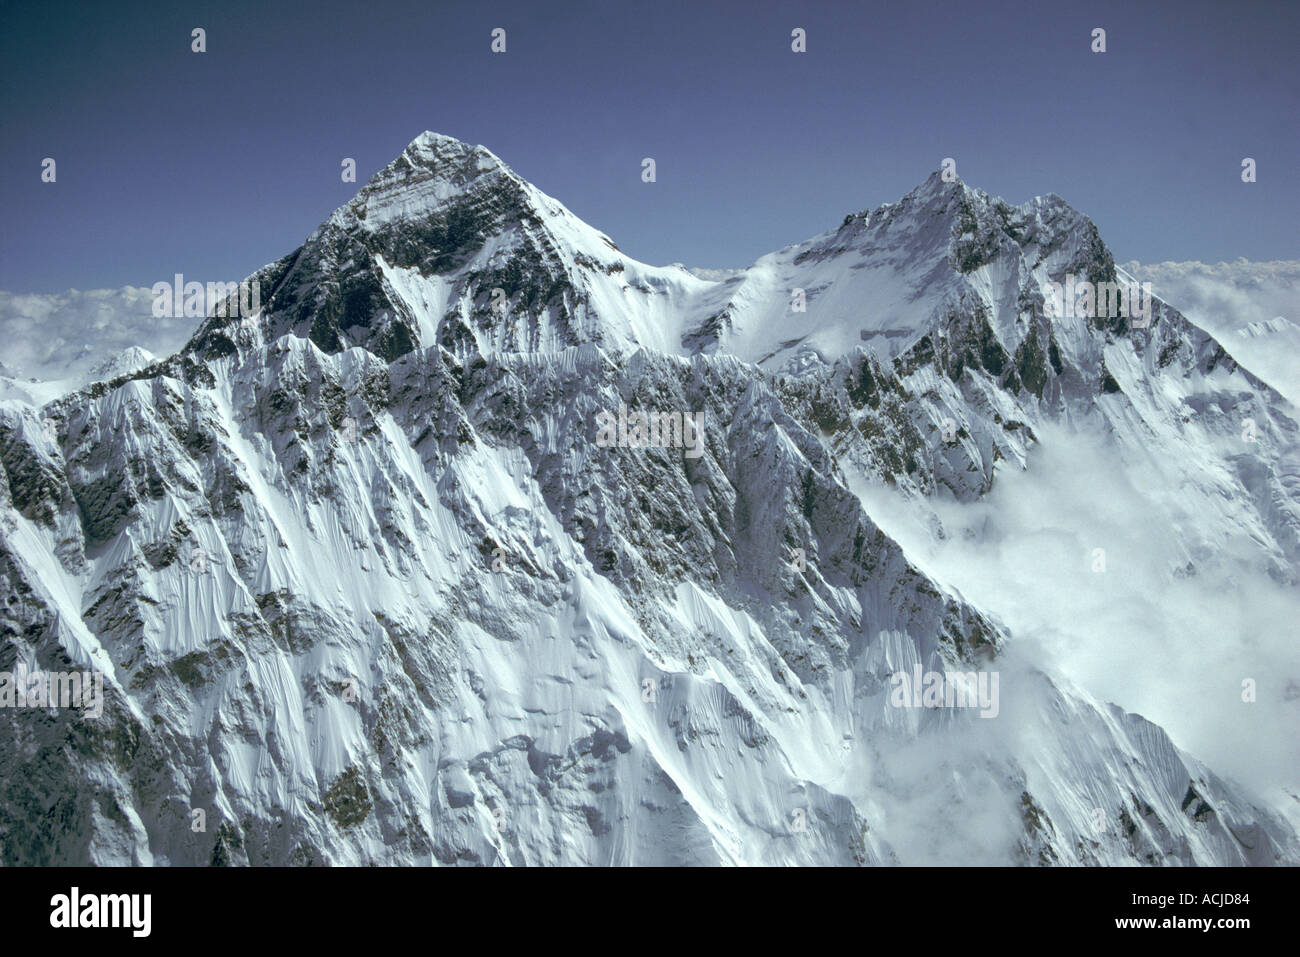 Aerial view of Mount Everest Nuptse 